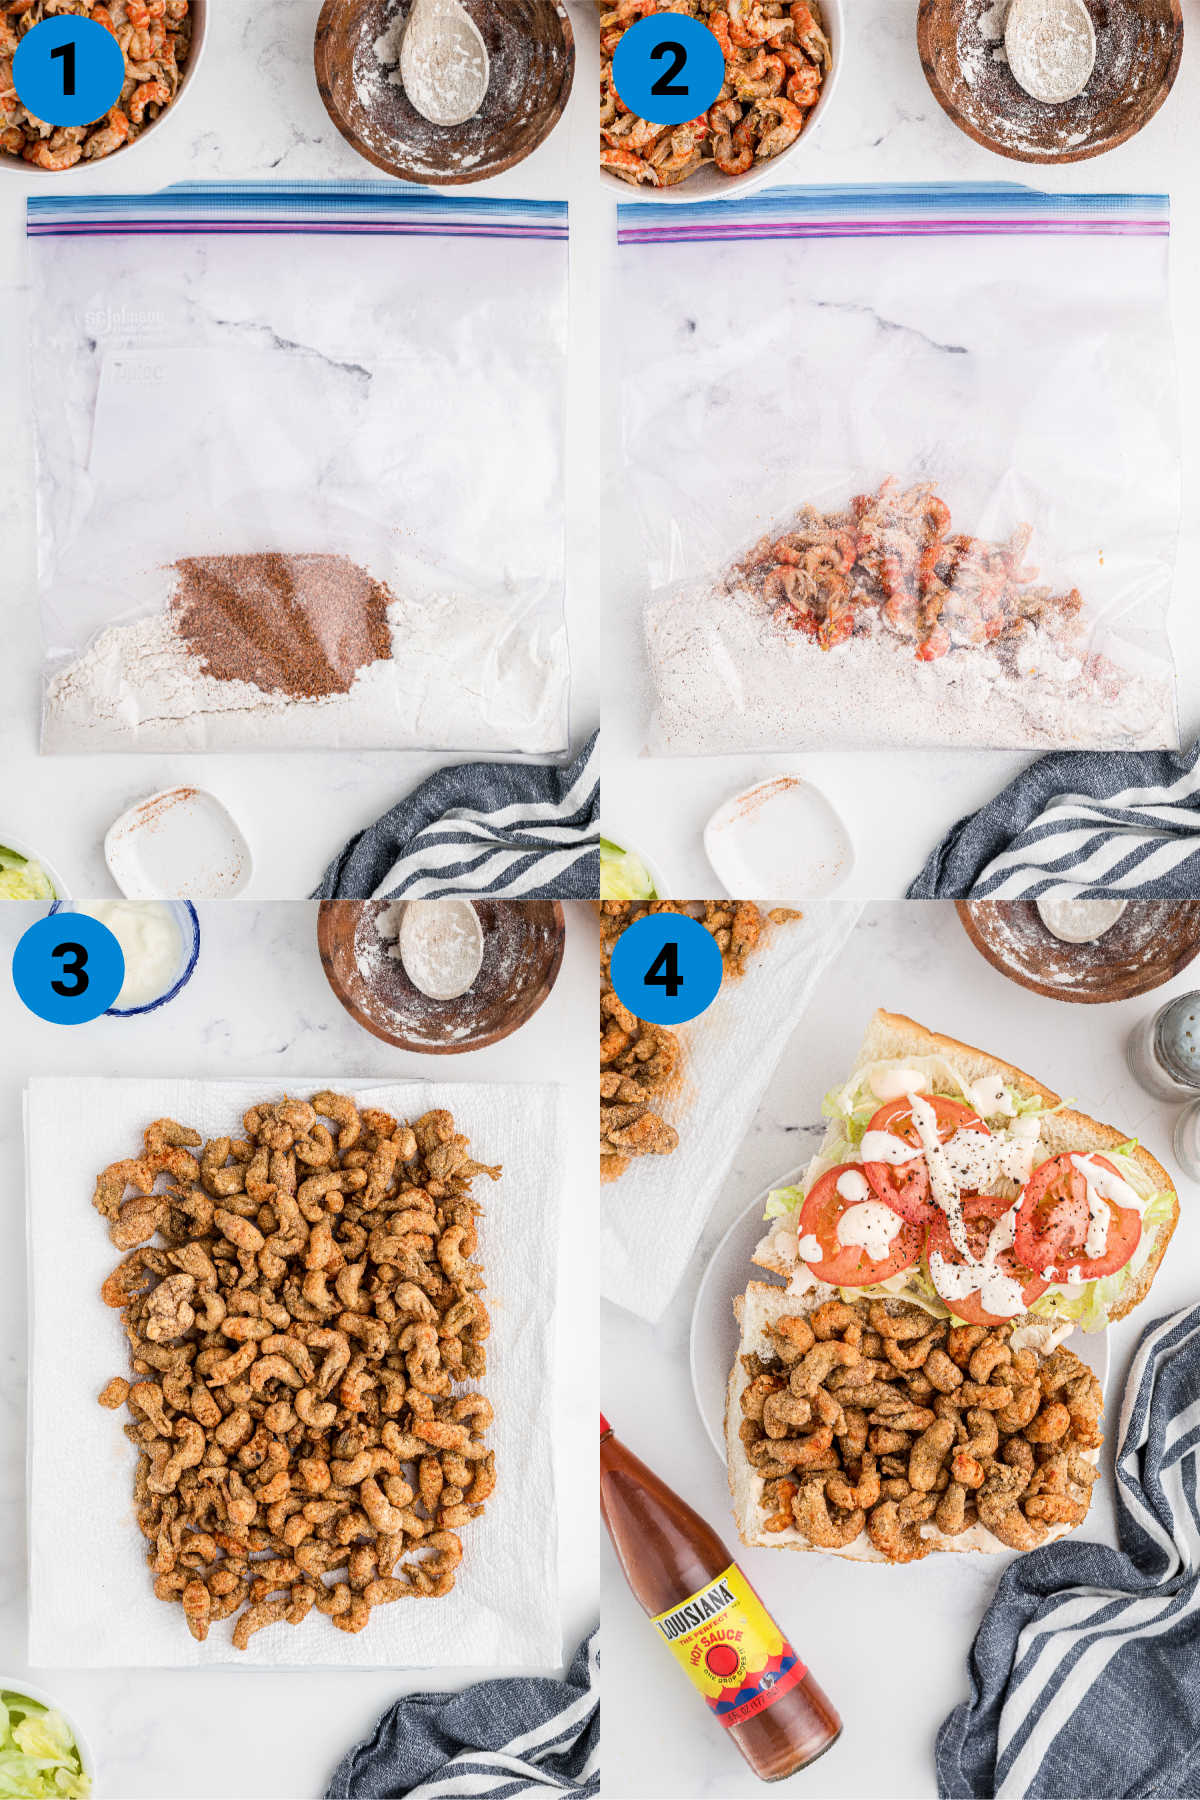 A collage of four images showing how to make a fried crawfish poboy.